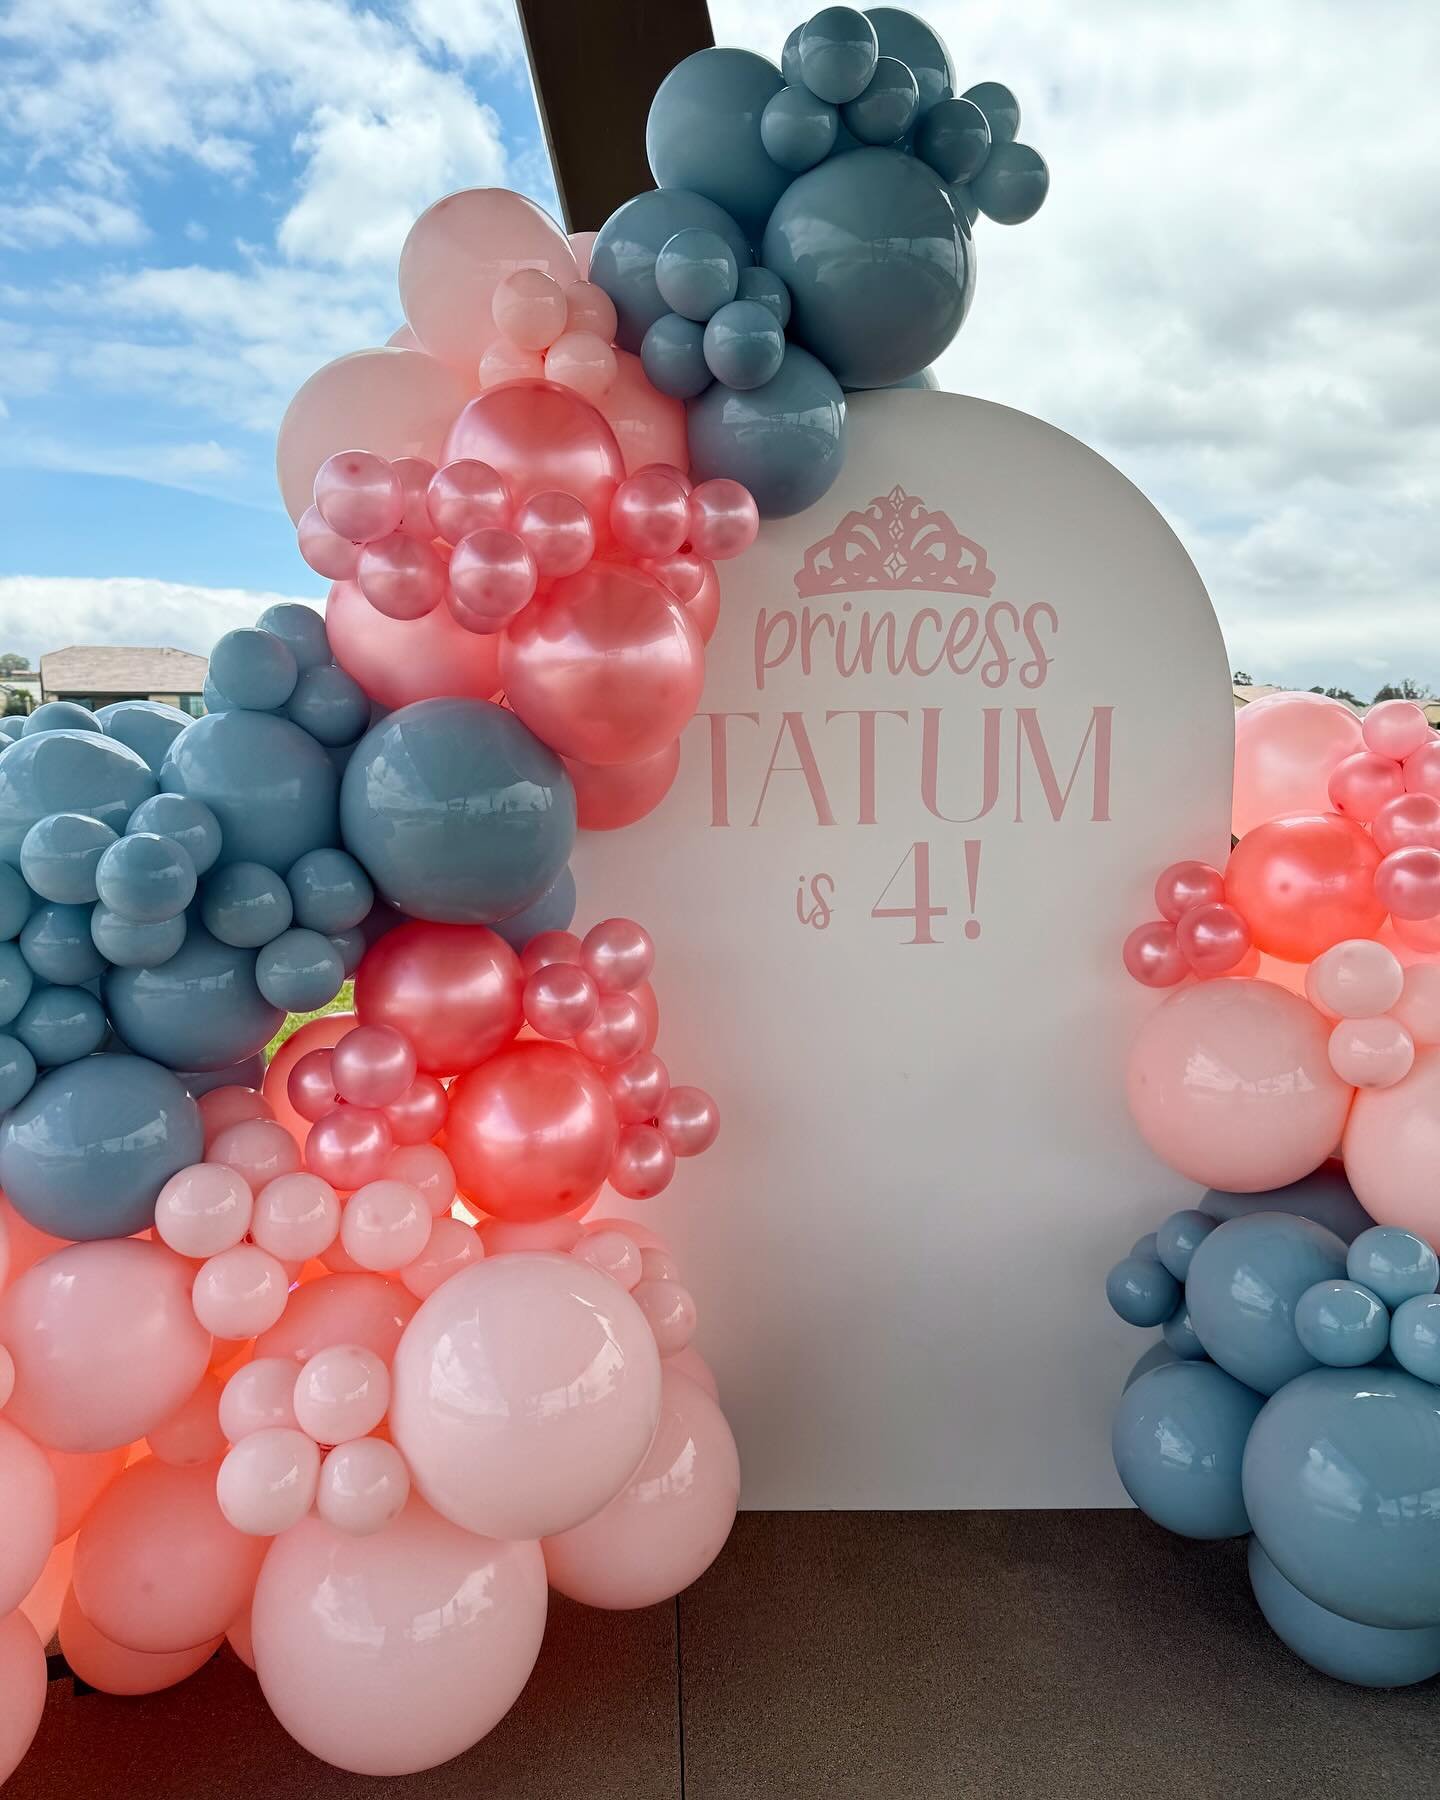 Did you know all of our balloon packages come with custom vinyl decals? We can customize any backdrop for your next bash! ✨🩷

#custombackdrop #bashdrop #balloonstyling #eventdesign #balloongarland #backdroprentals #balloondecor #balloonart #balloons